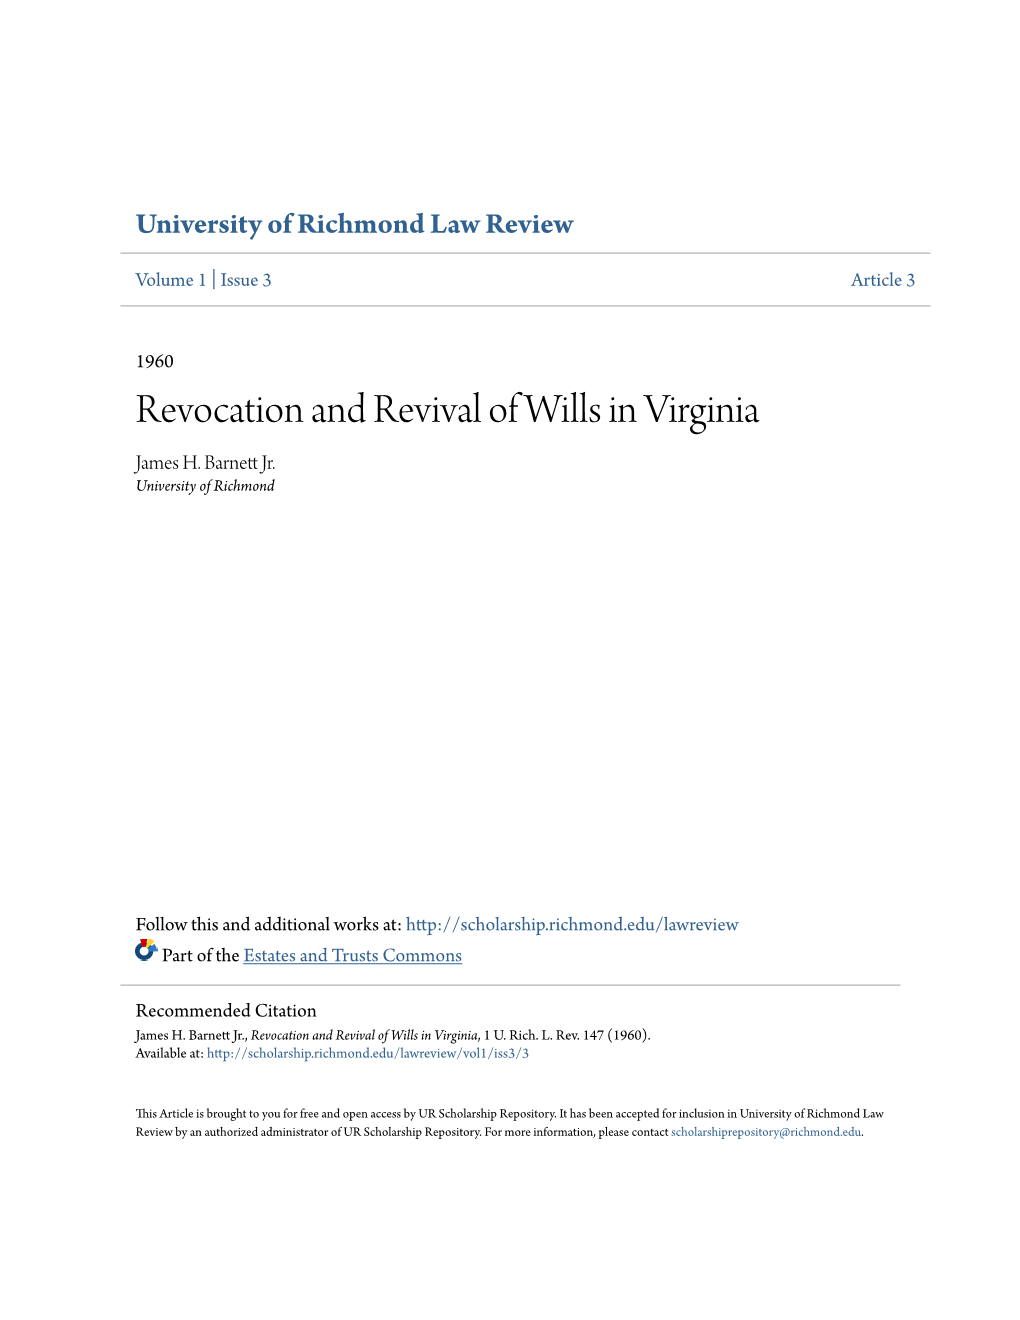 Revocation and Revival of Wills in Virginia James H